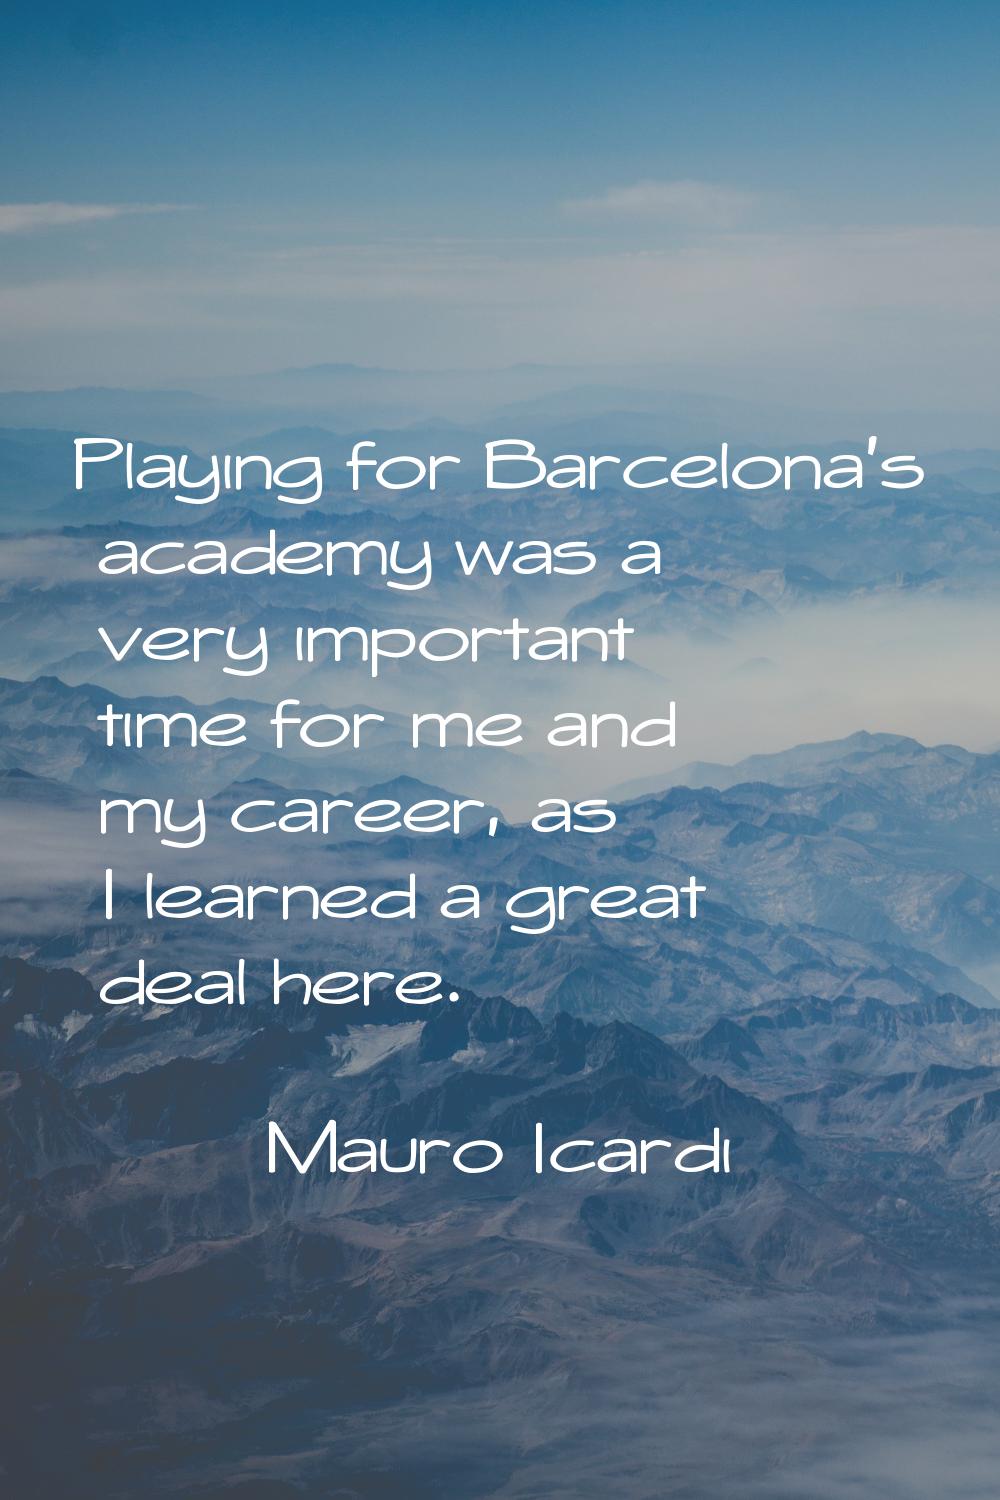 Playing for Barcelona's academy was a very important time for me and my career, as I learned a grea